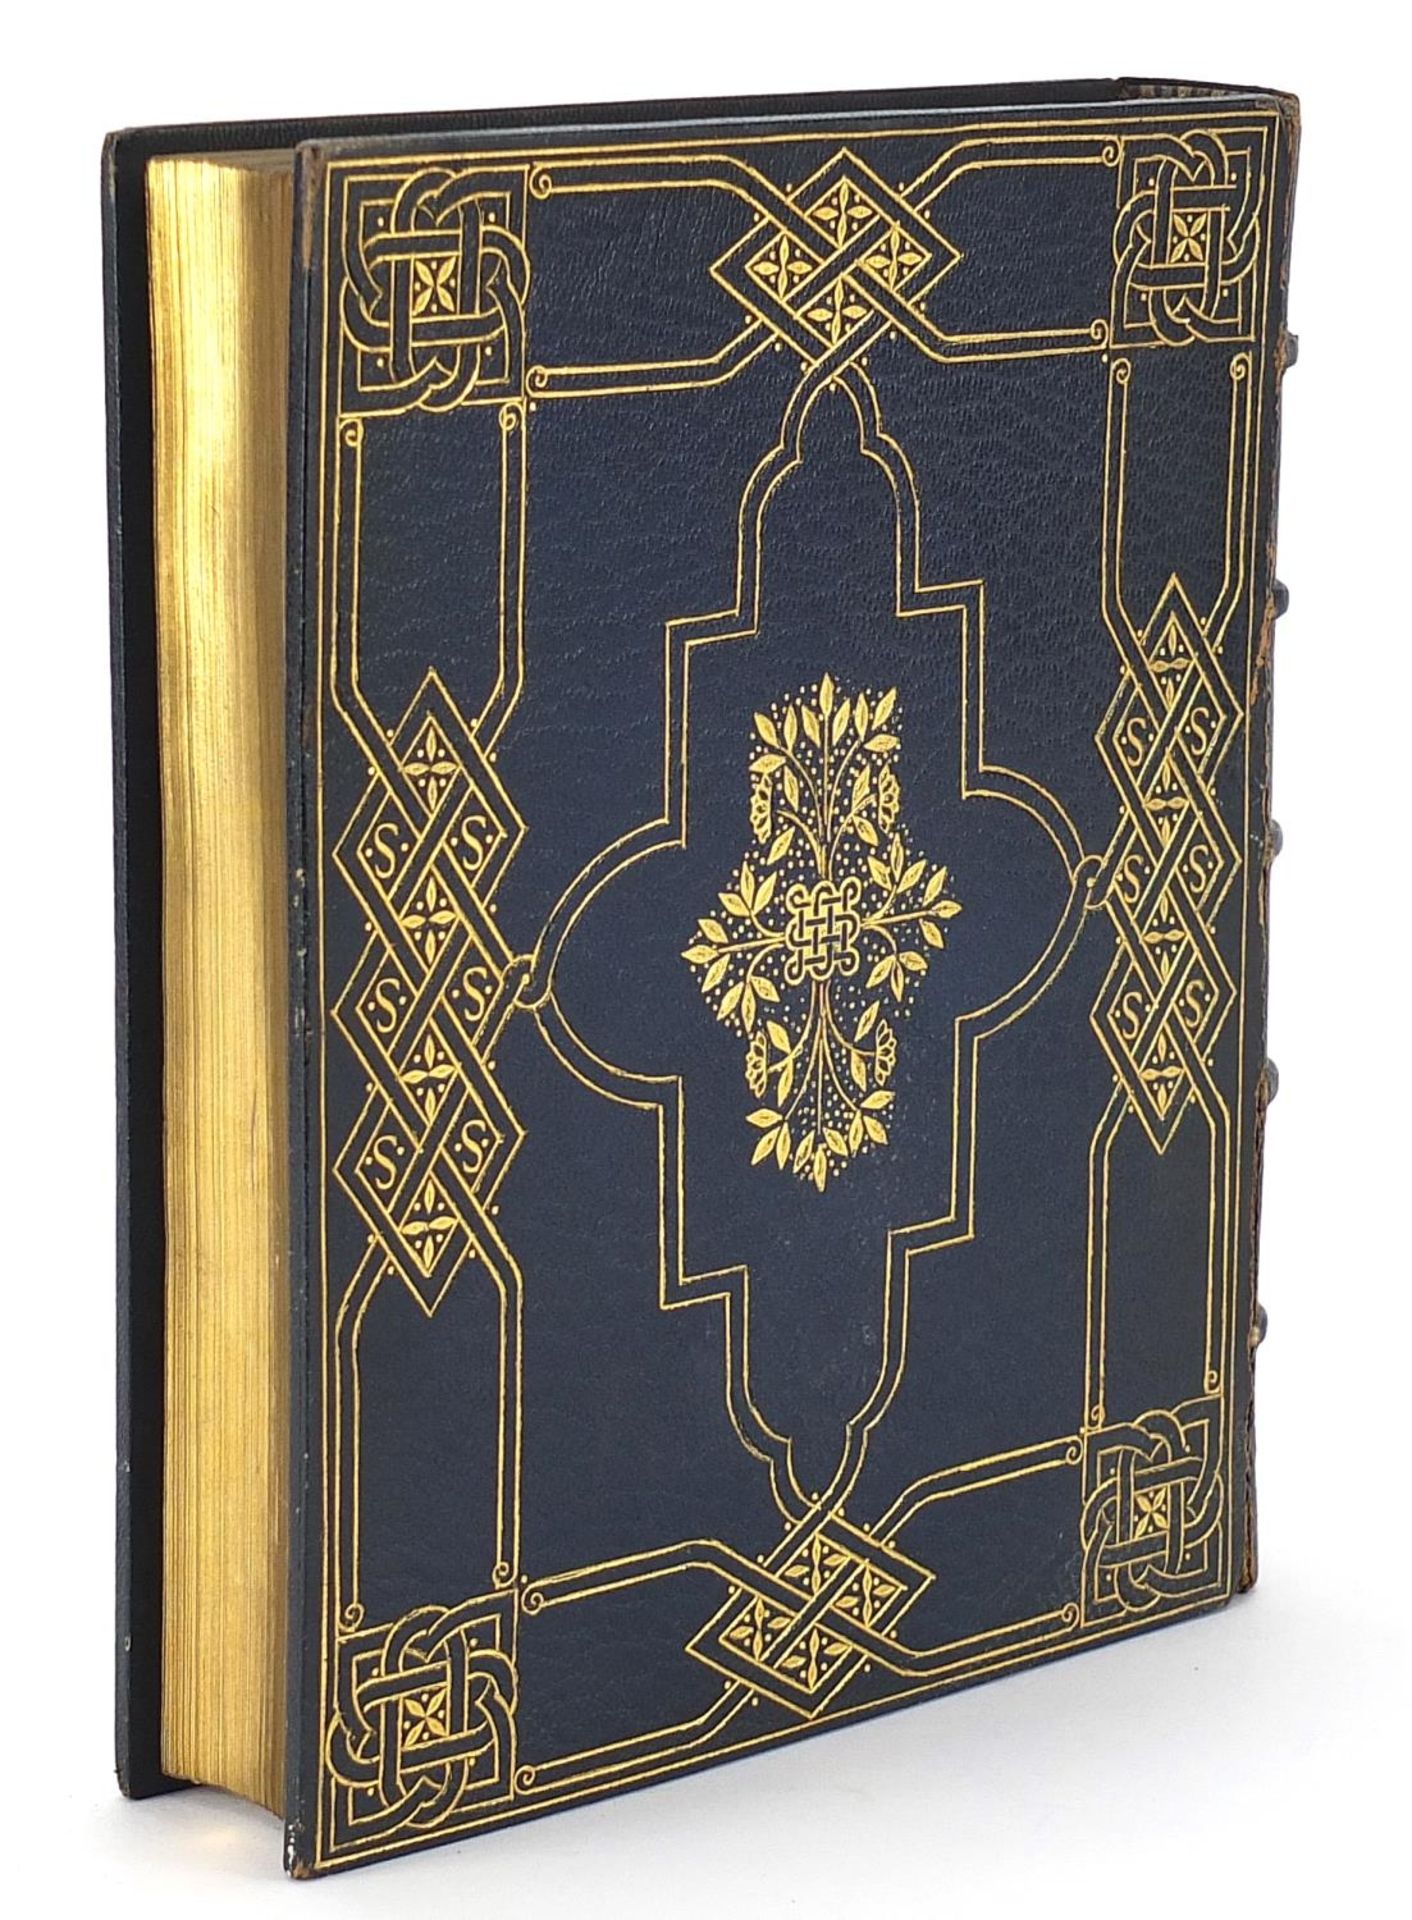 Poems by Percy Bysshe Shelley, tooled leather hardback book, edition of five hundred copies - Image 4 of 4